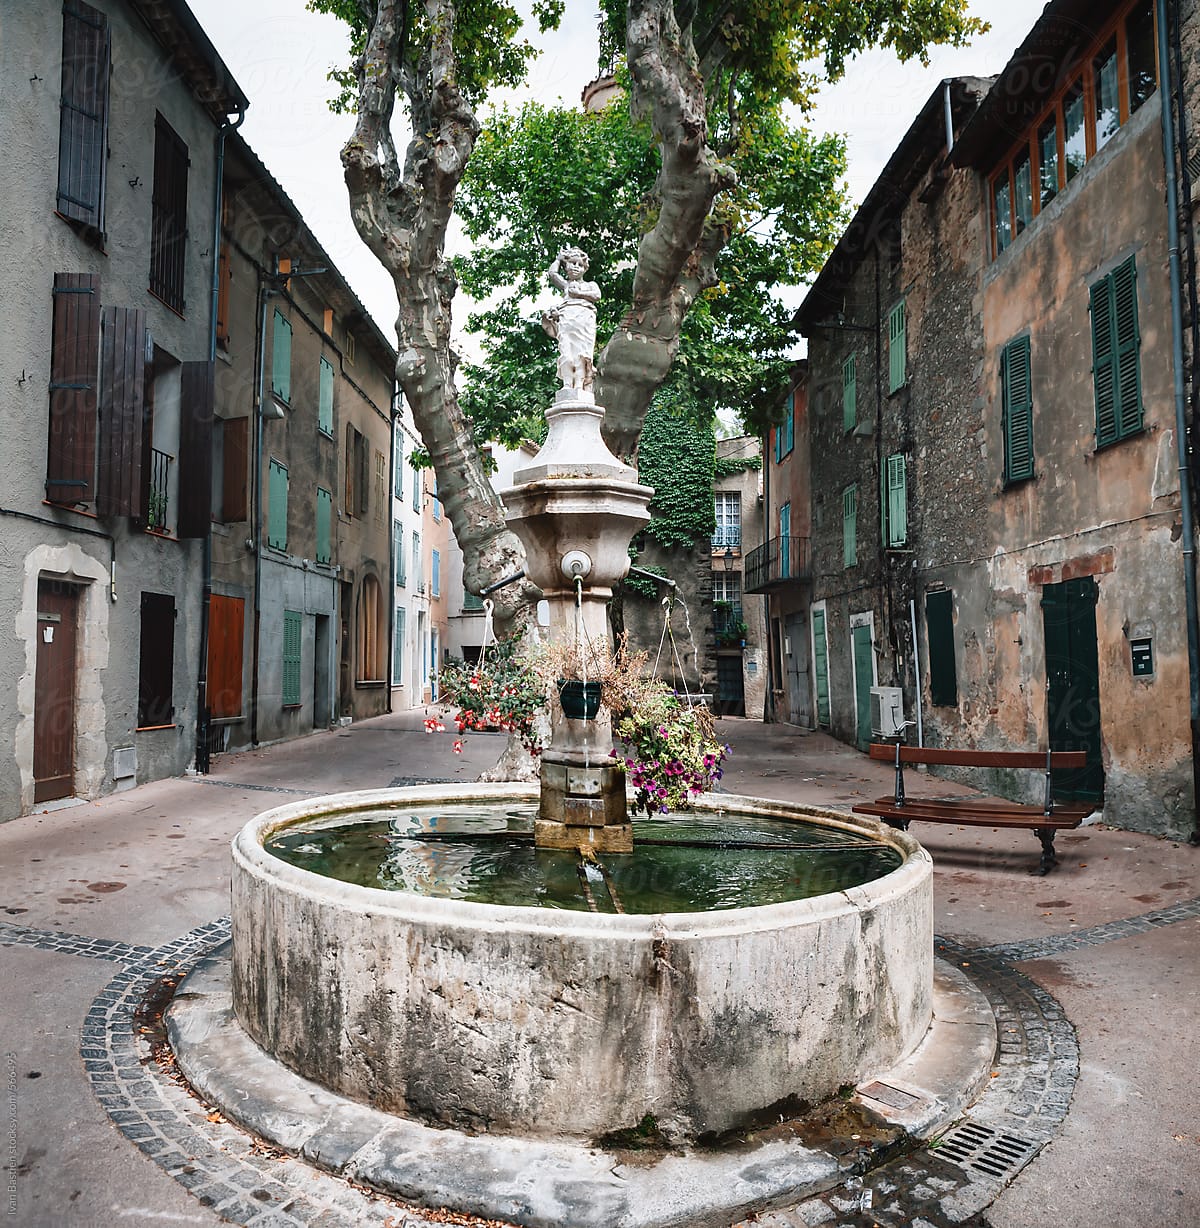 Fountain on a public square in an old village in the south of France (Provence)